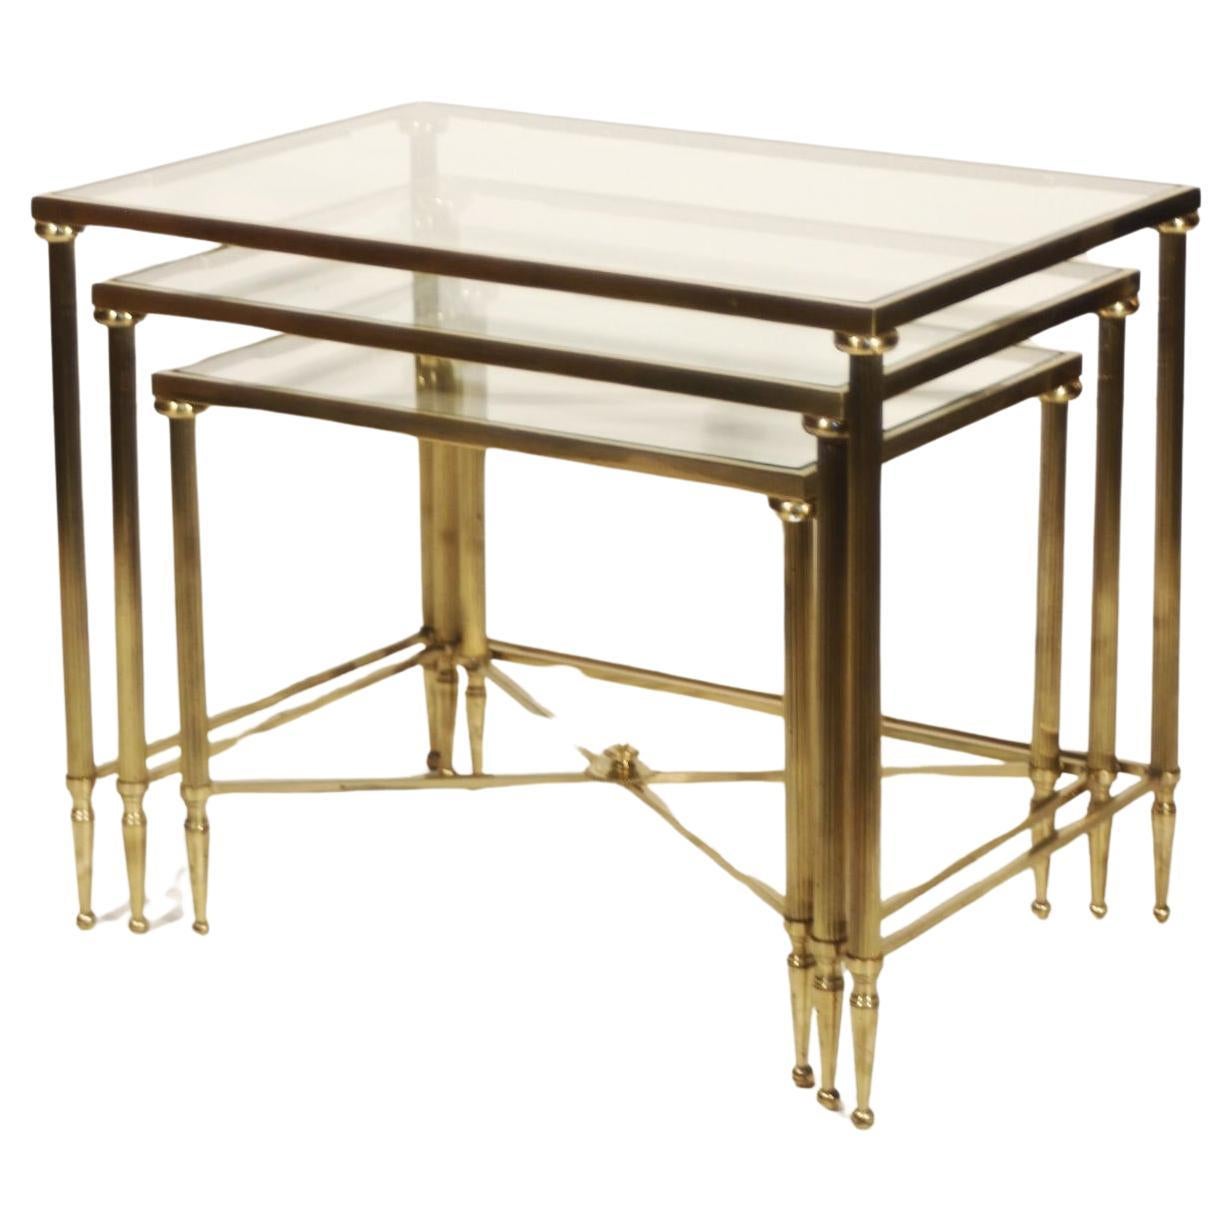 What are nesting tables?